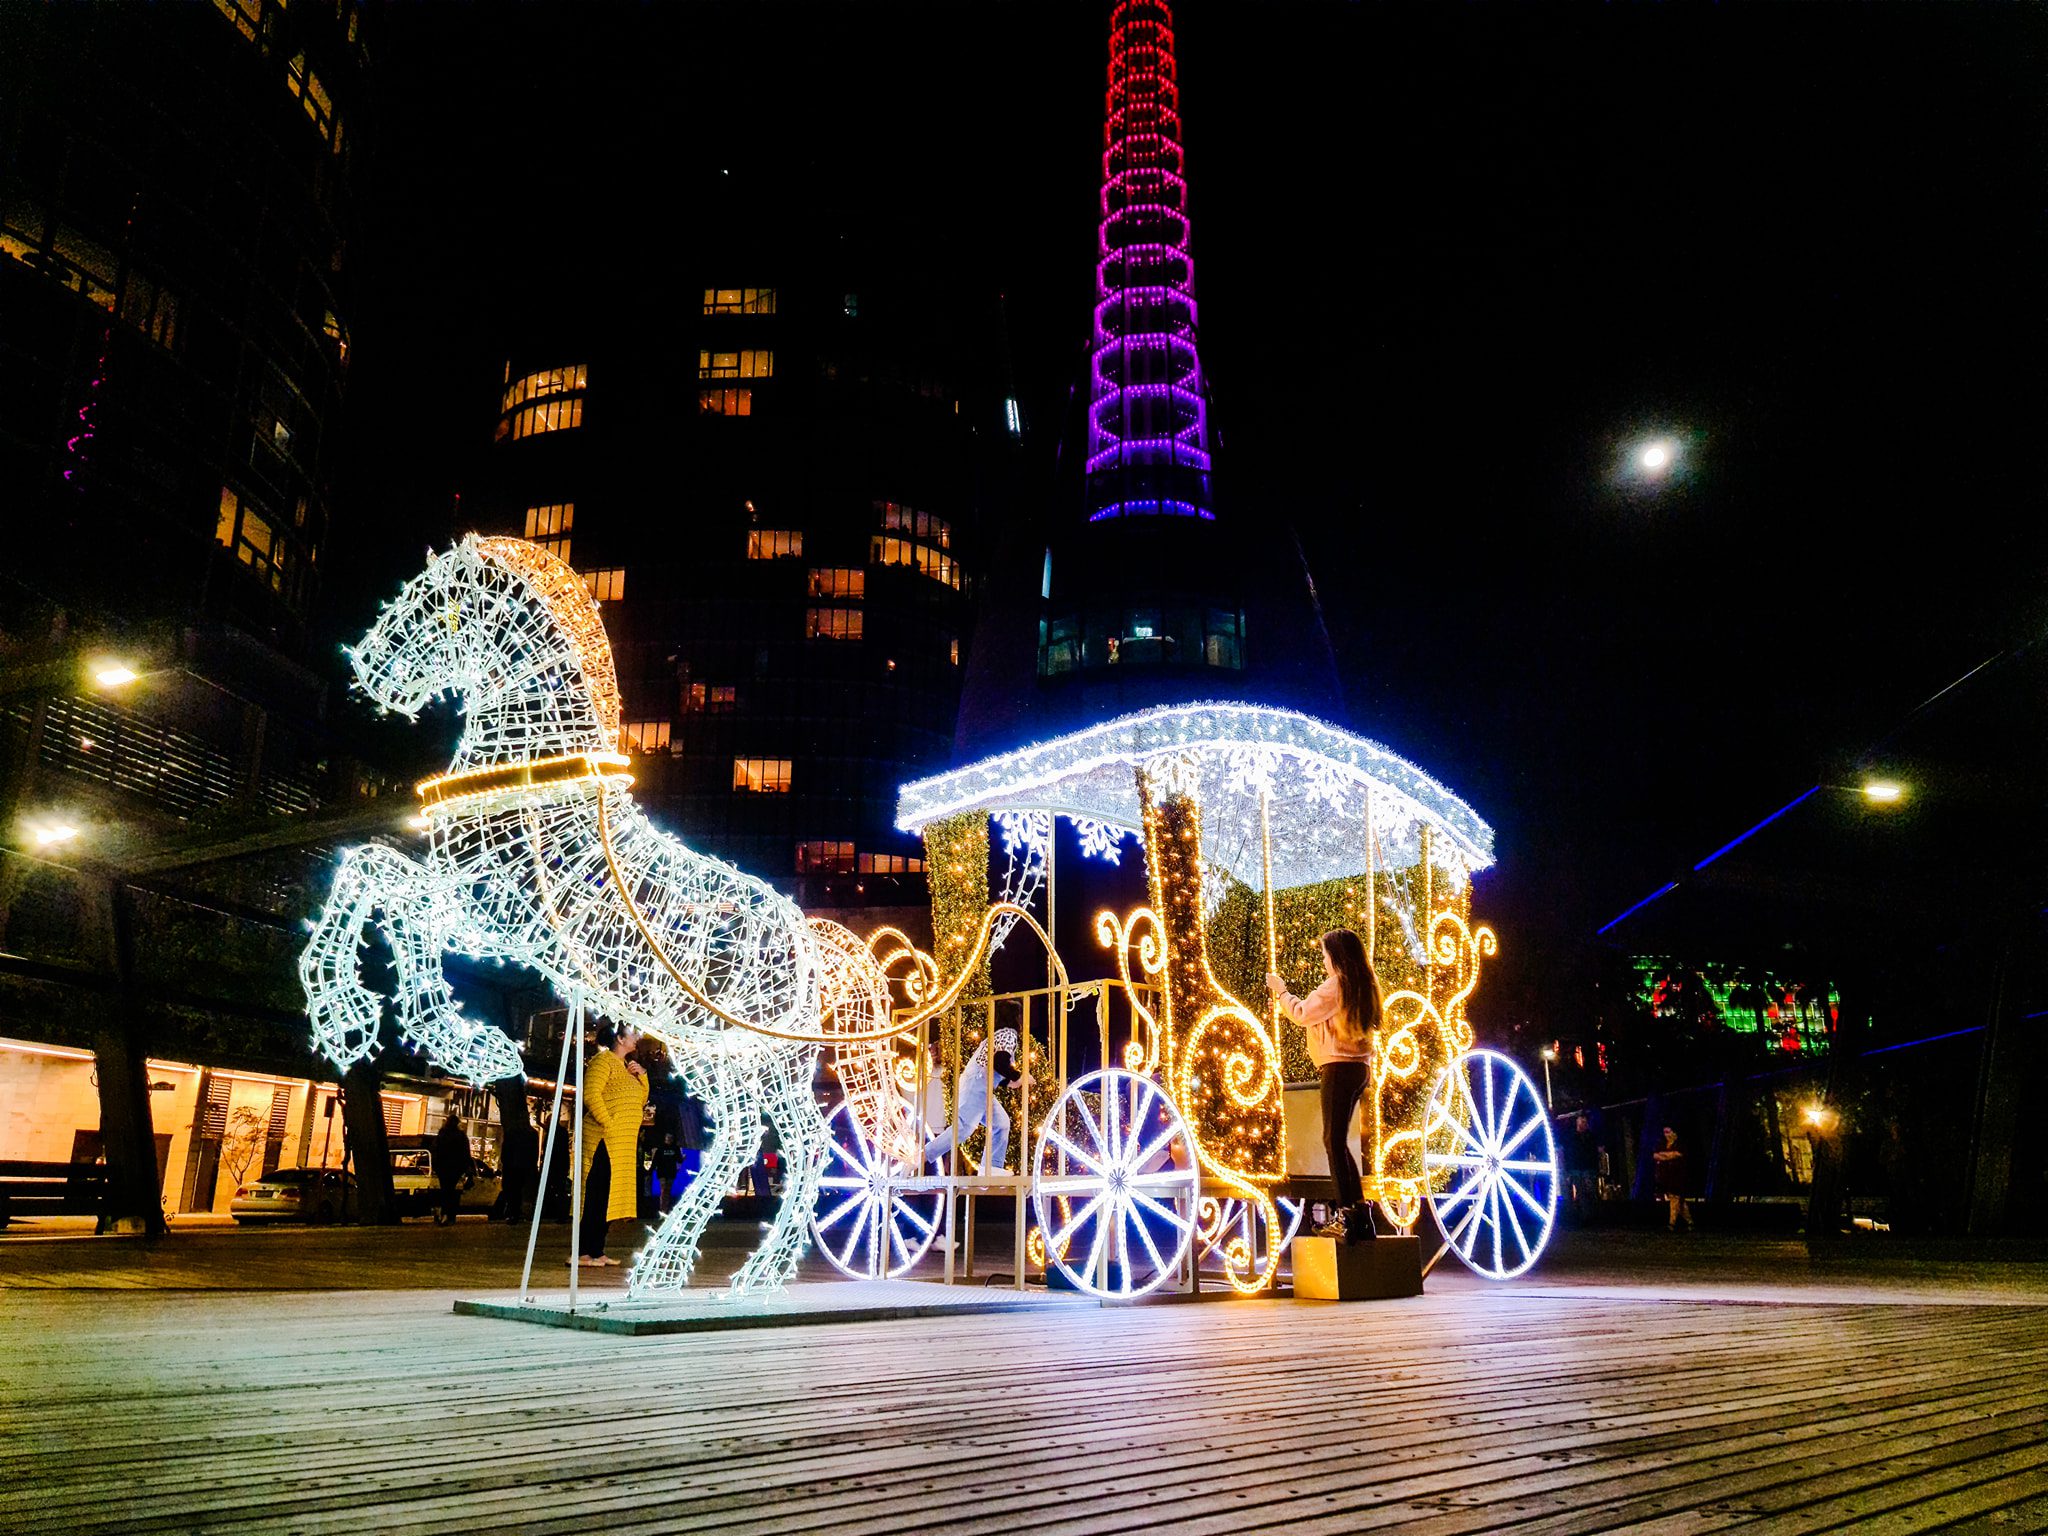 The City of Perth Christmas Lights Trail